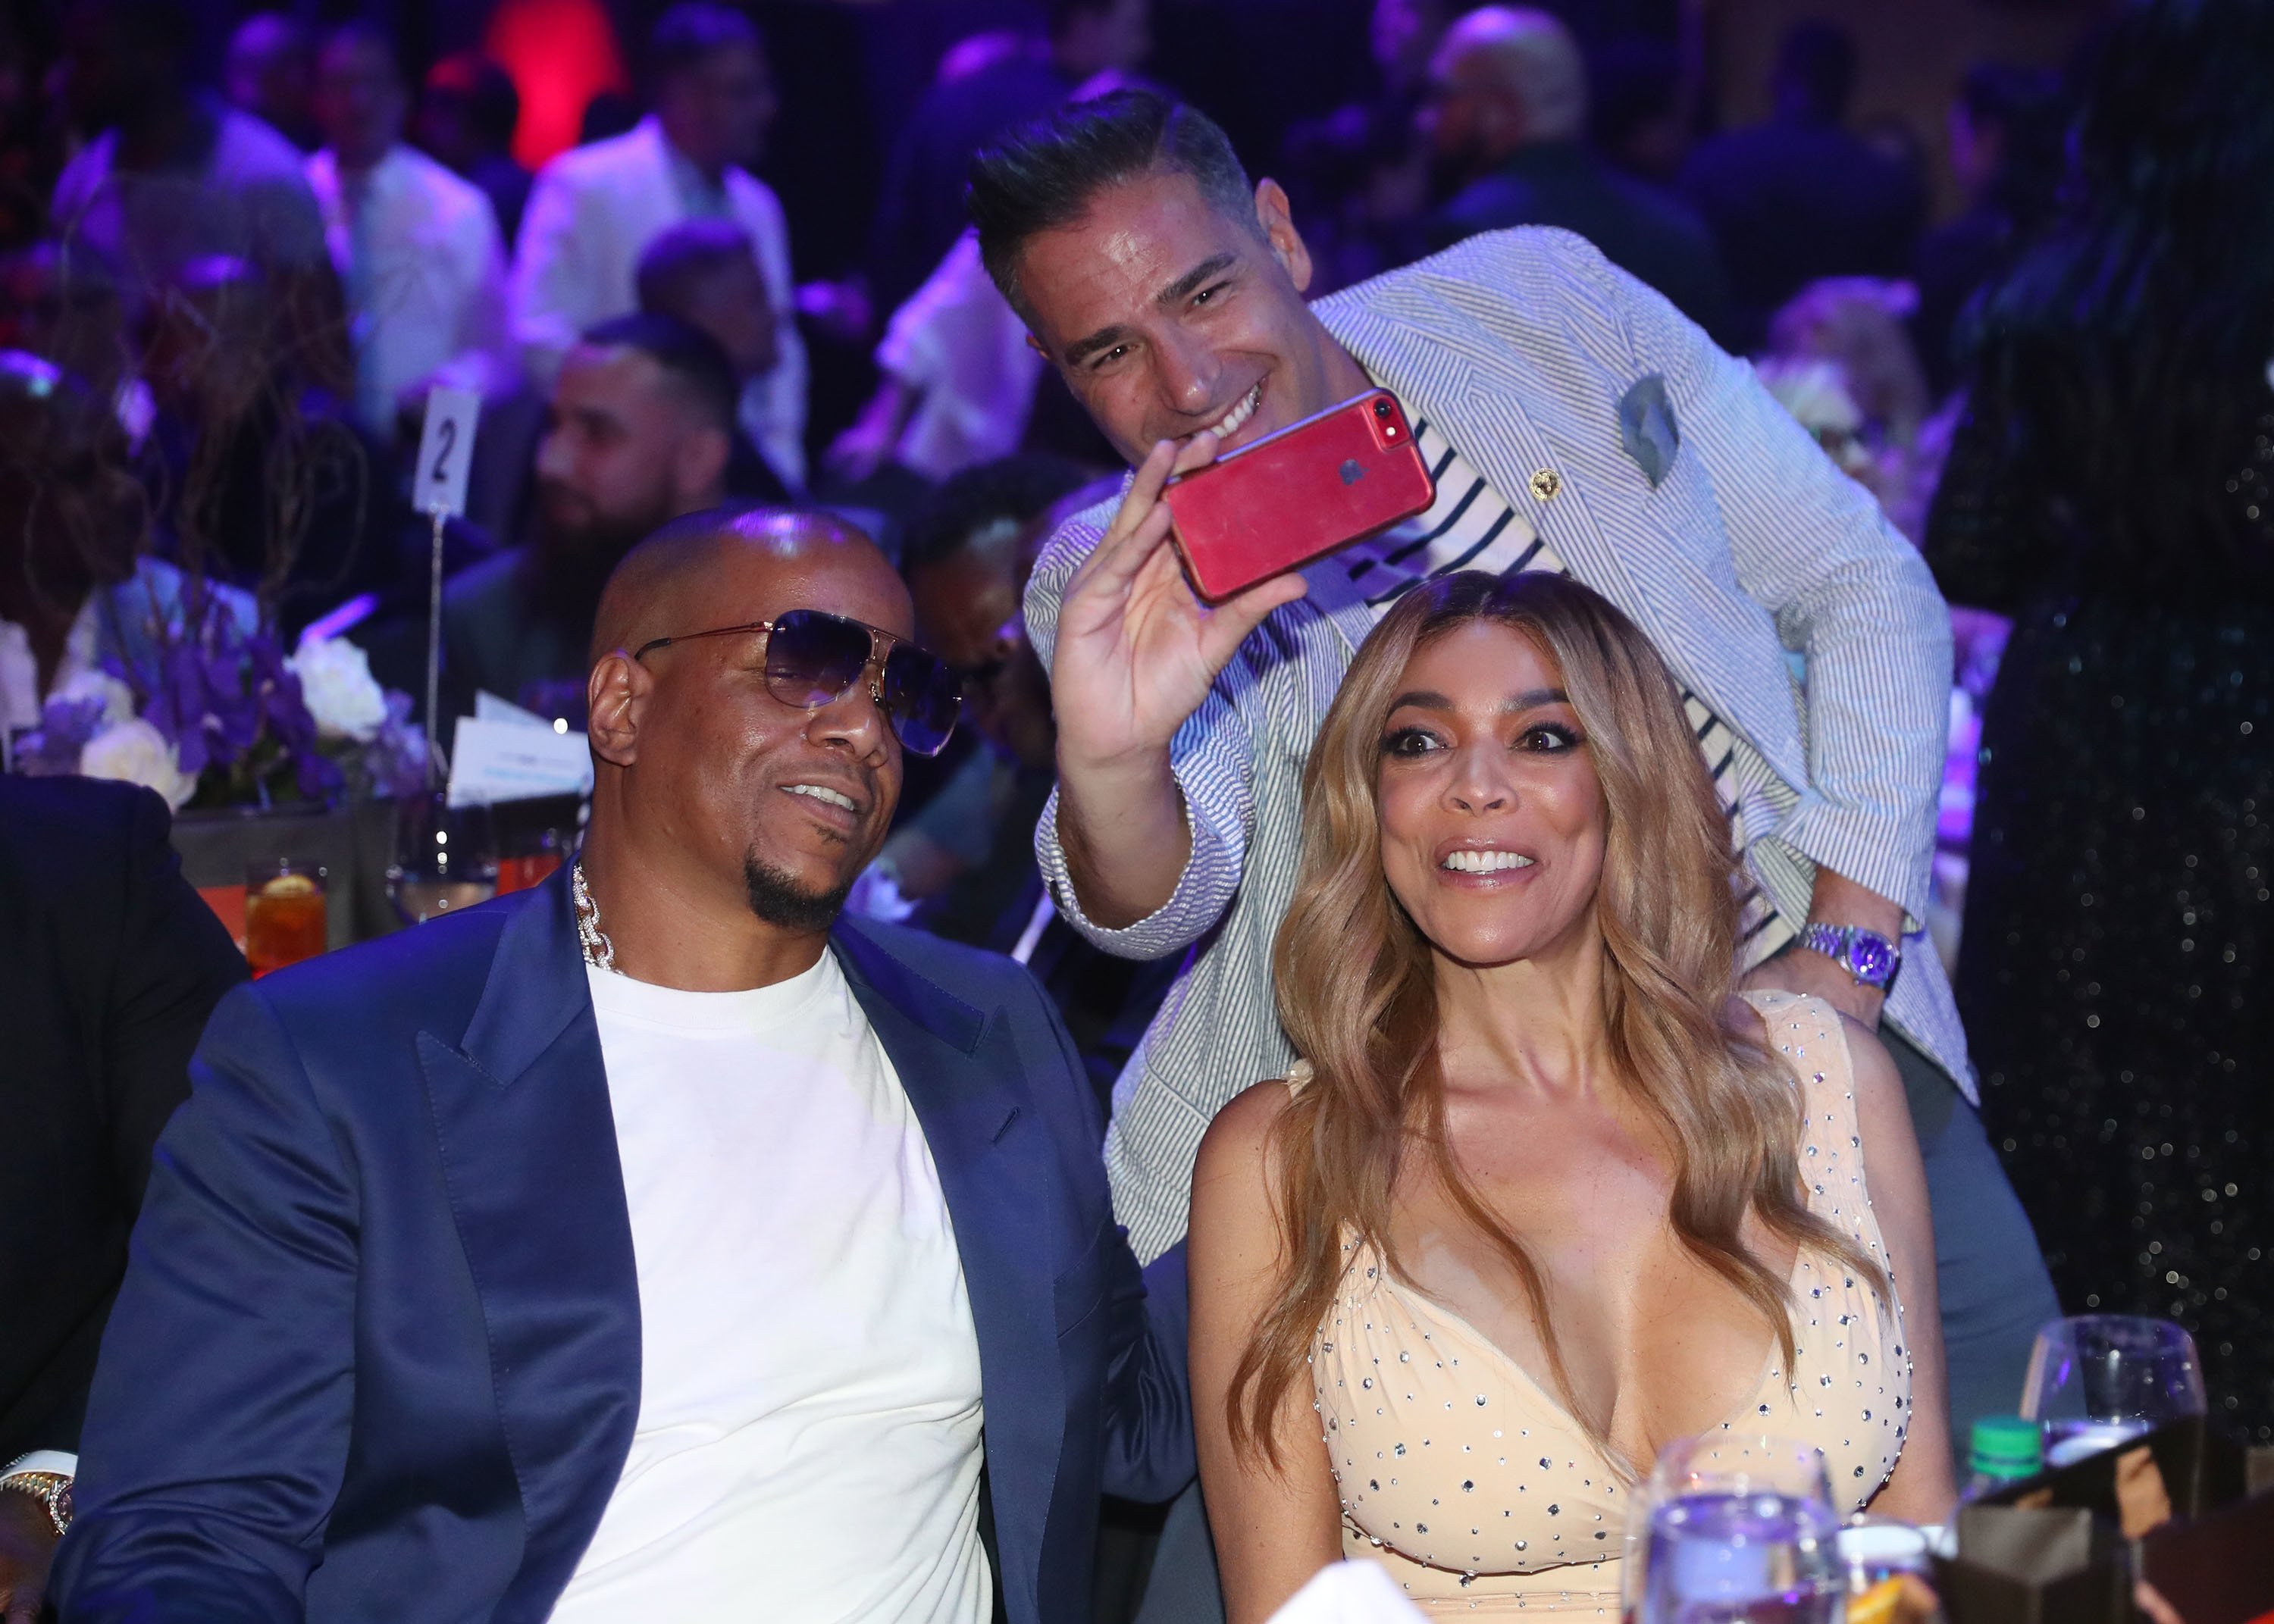 Wendy Williams and guests smiling and taking a selfie at a social event